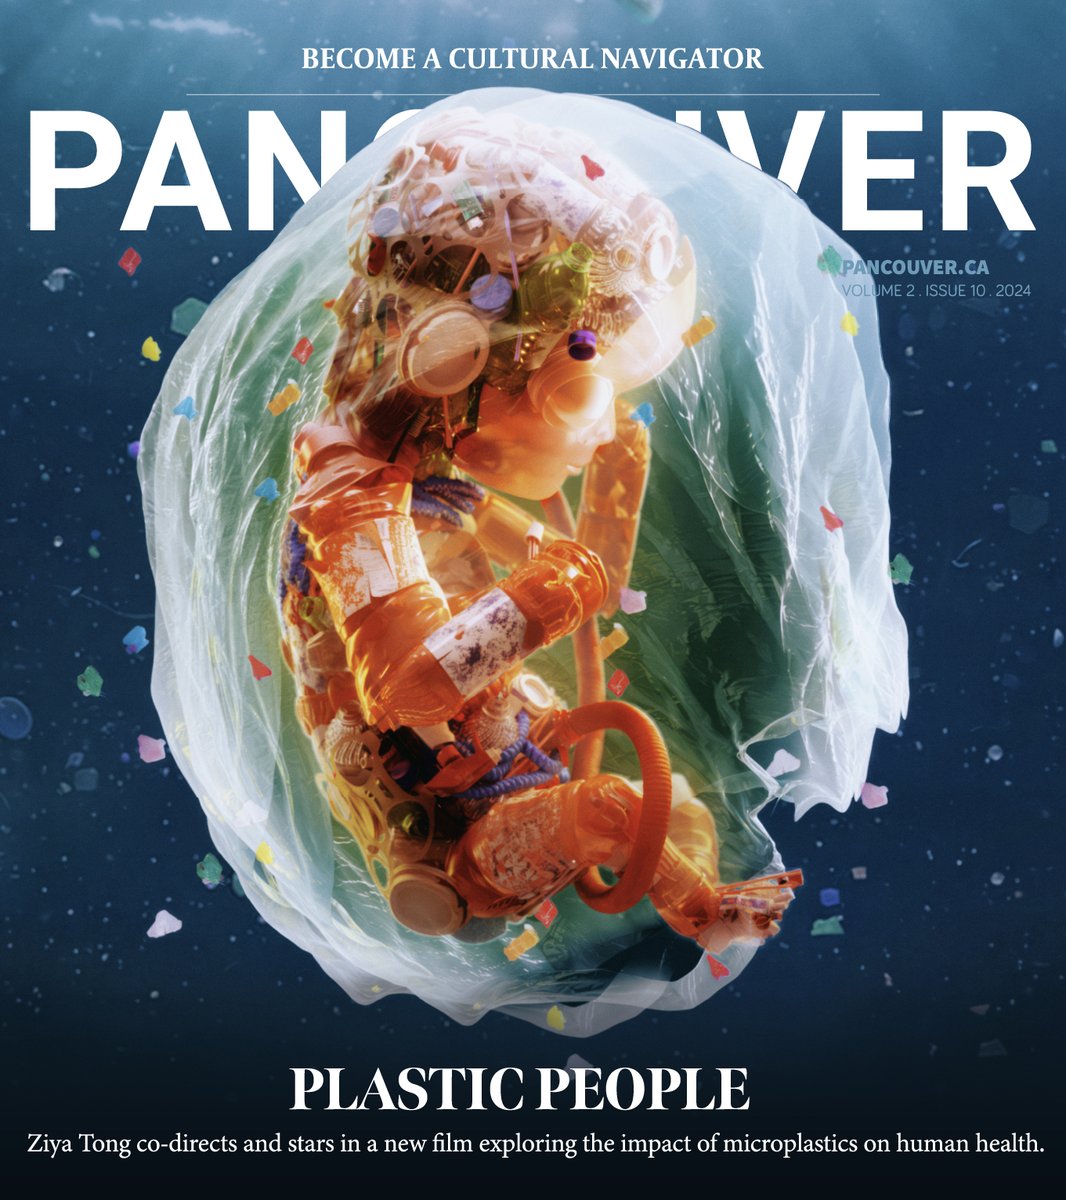 Thanks to @PancouverMedia art director Jessica Sung for designing the newest Pancouver online cover. Plastic People is @DOXAFestival on May 10. Image (c) Plastic Soup Foundation. Read the article at pancouver.ca @rjcsmith @ziyatong @plasticpeople_